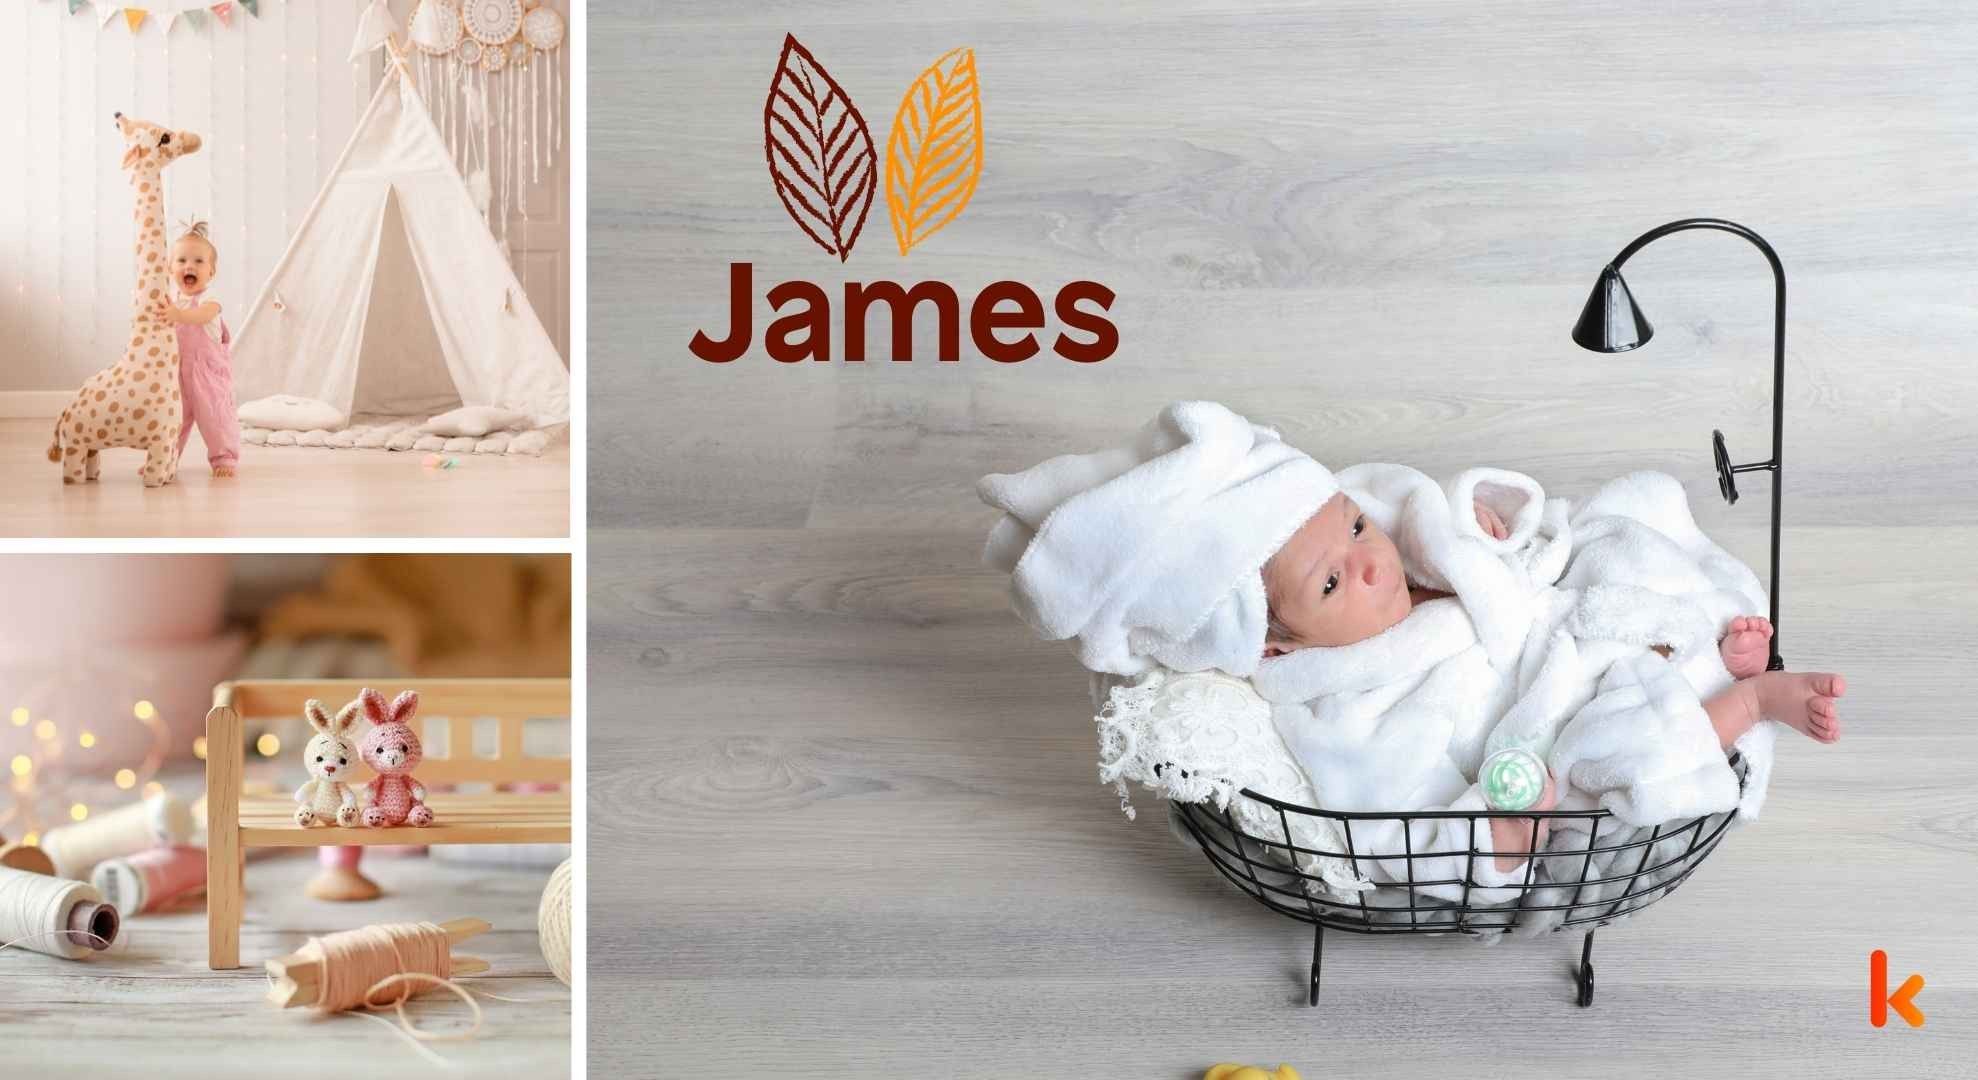 Meaning of the name James